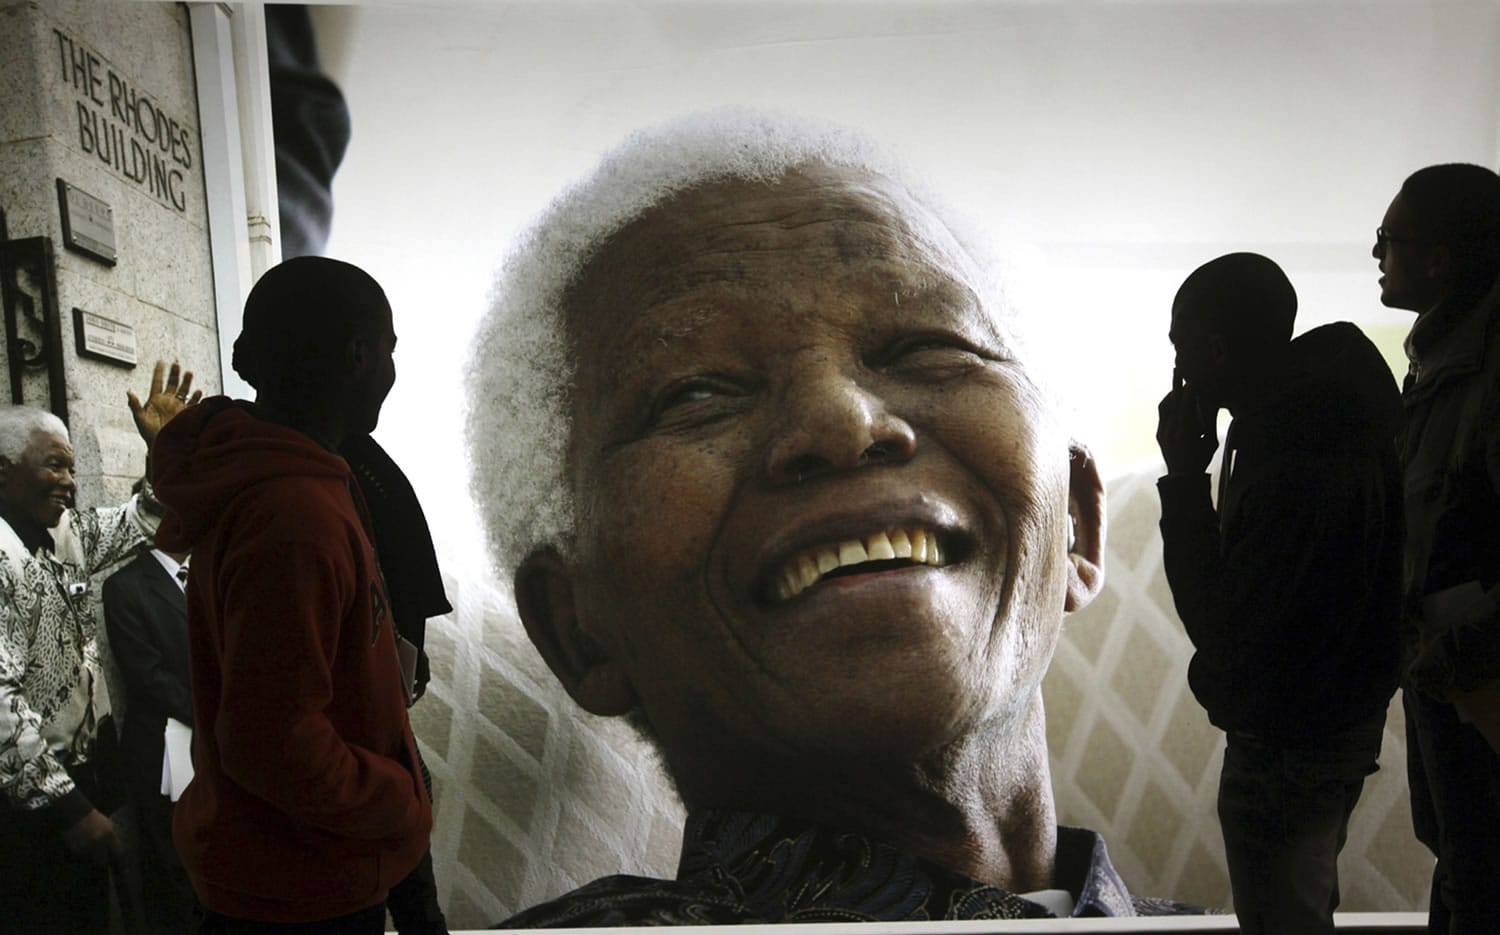 Giant photographs of former South African President Nelson Mandela are displayed at the Nelson Mandela Legacy Exhibition at the Civic Centre in Cape Town, South Africa.